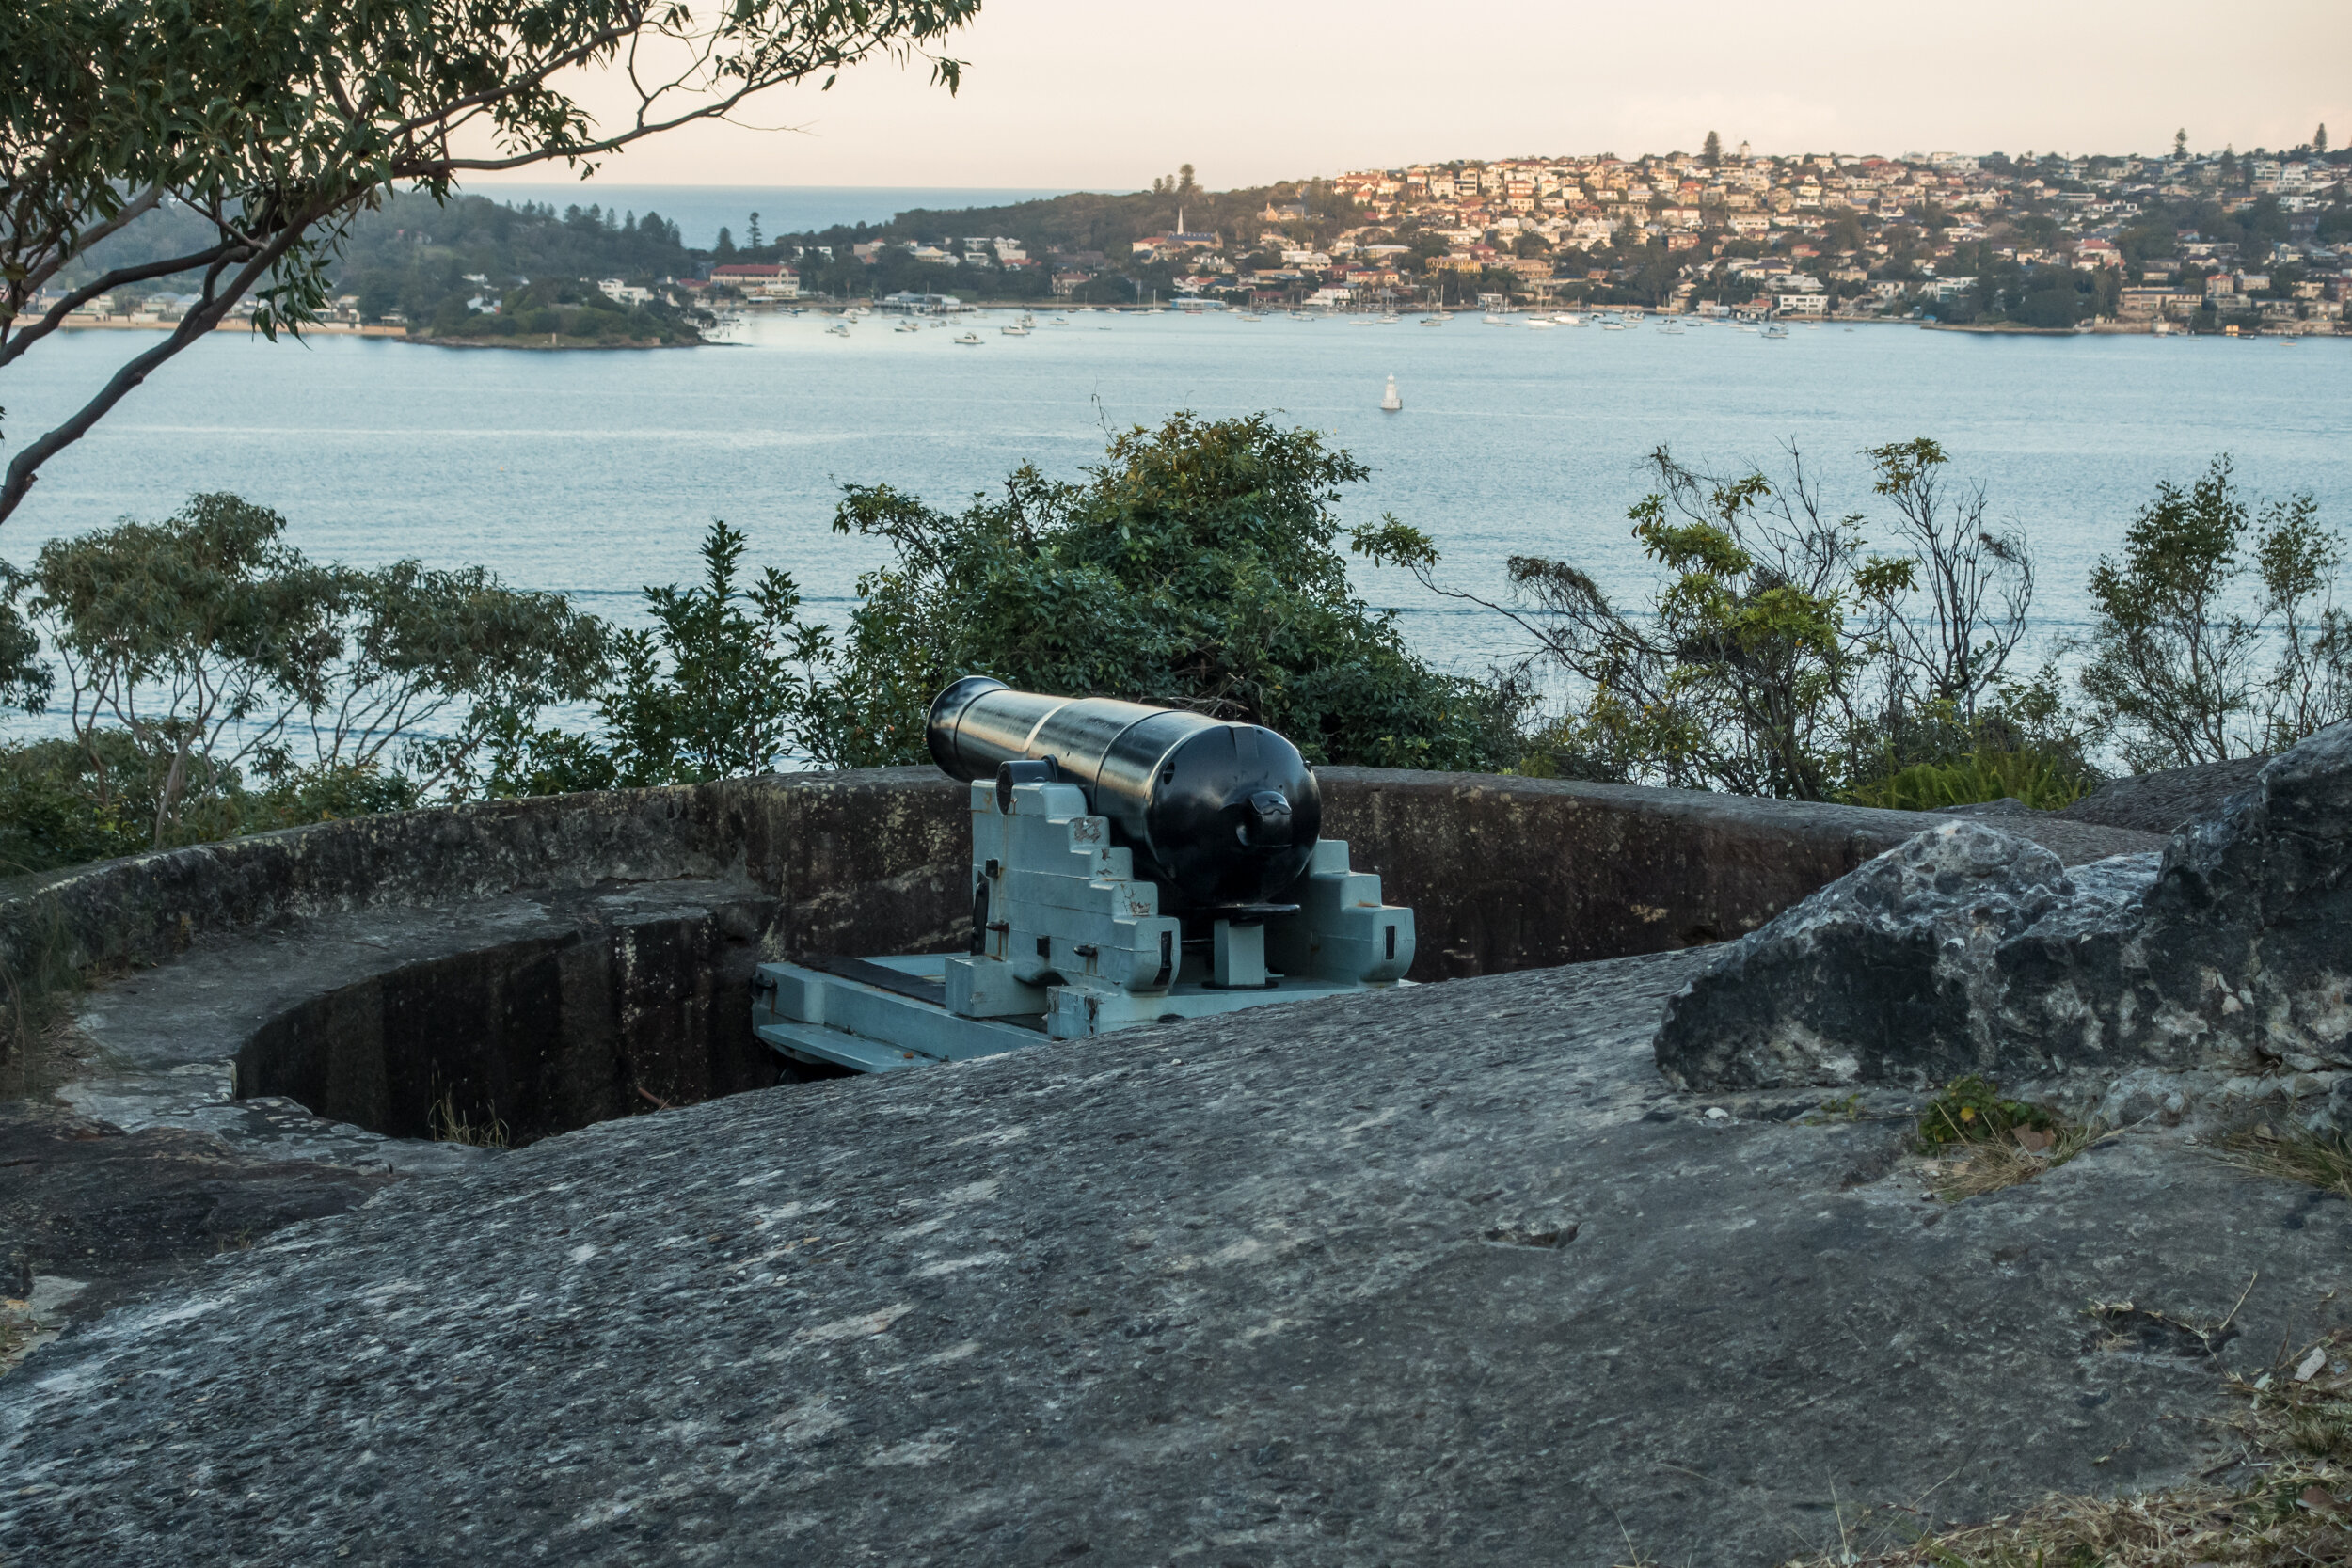 Heritage locations like this on Middle Head are easy to interpret with historic artillery in place.